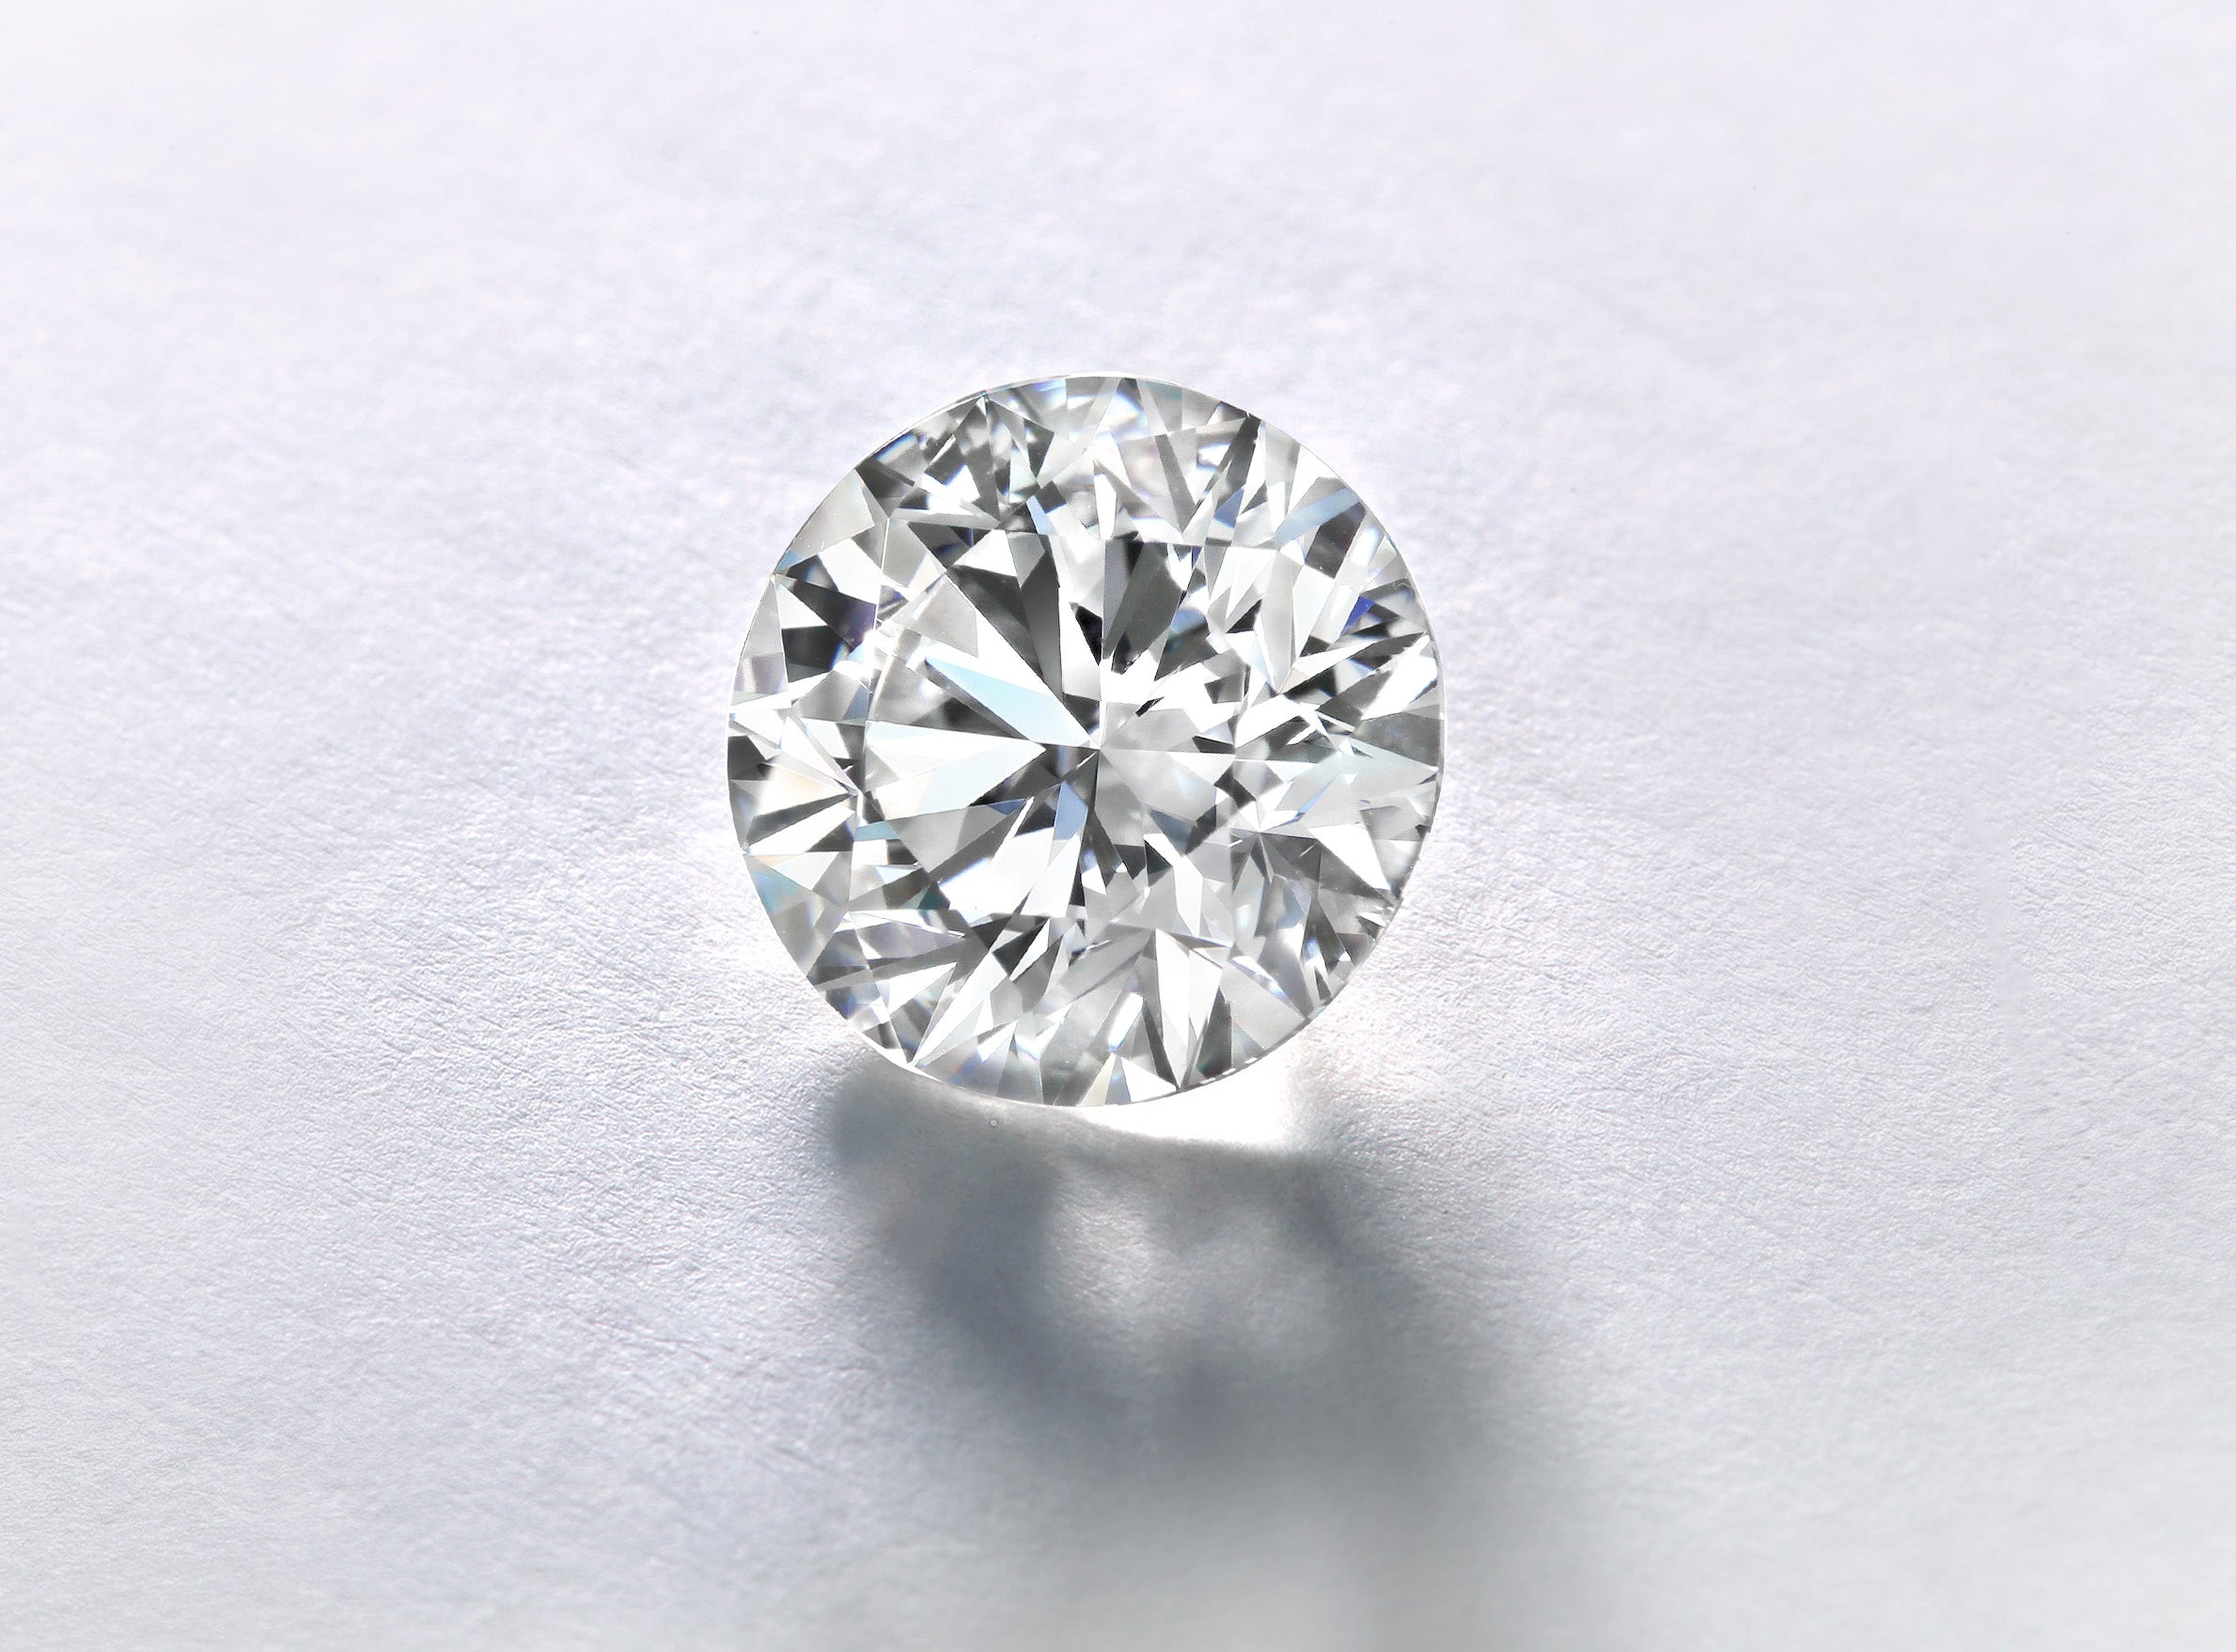 0.23ct Dcolor IF